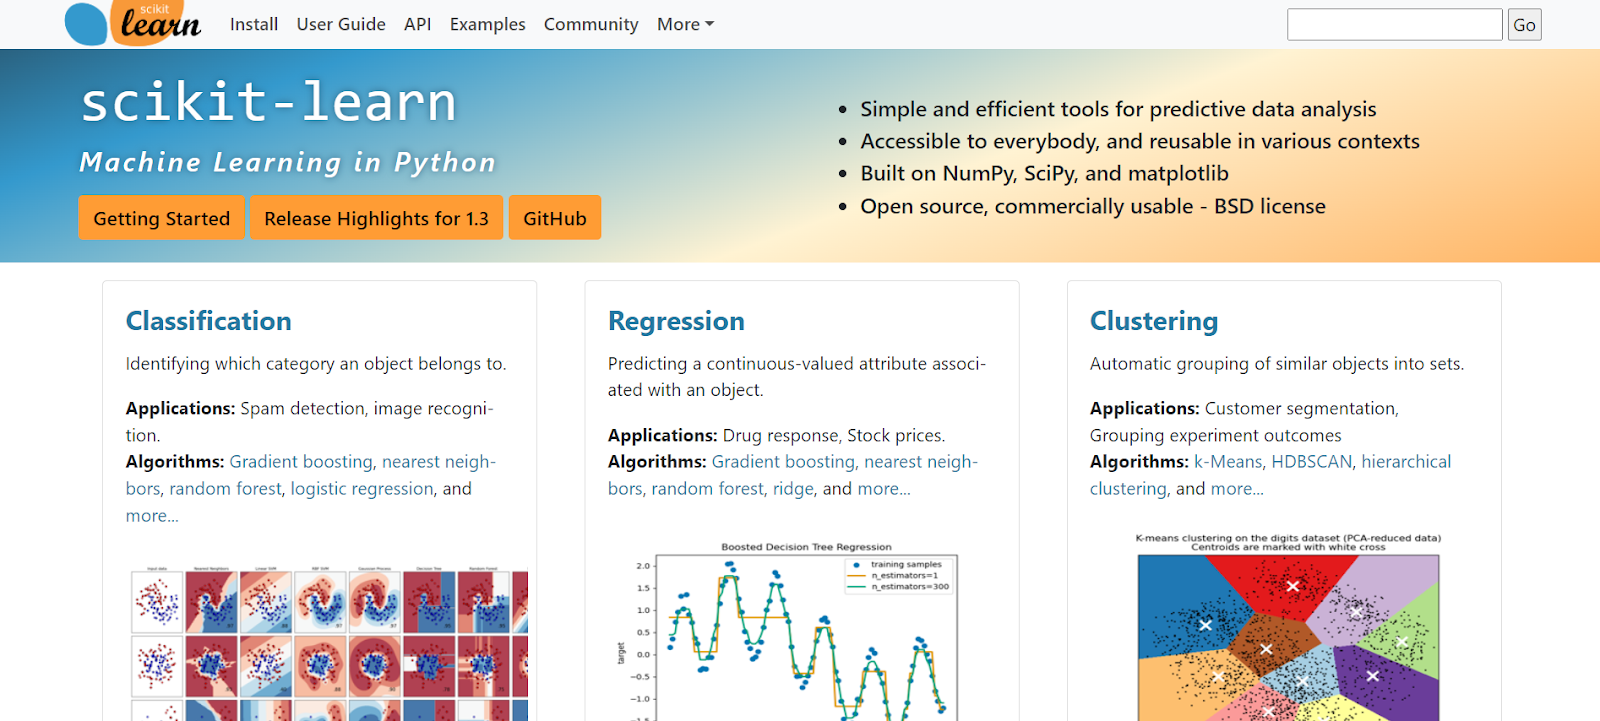 Scikit-learn machine learning library